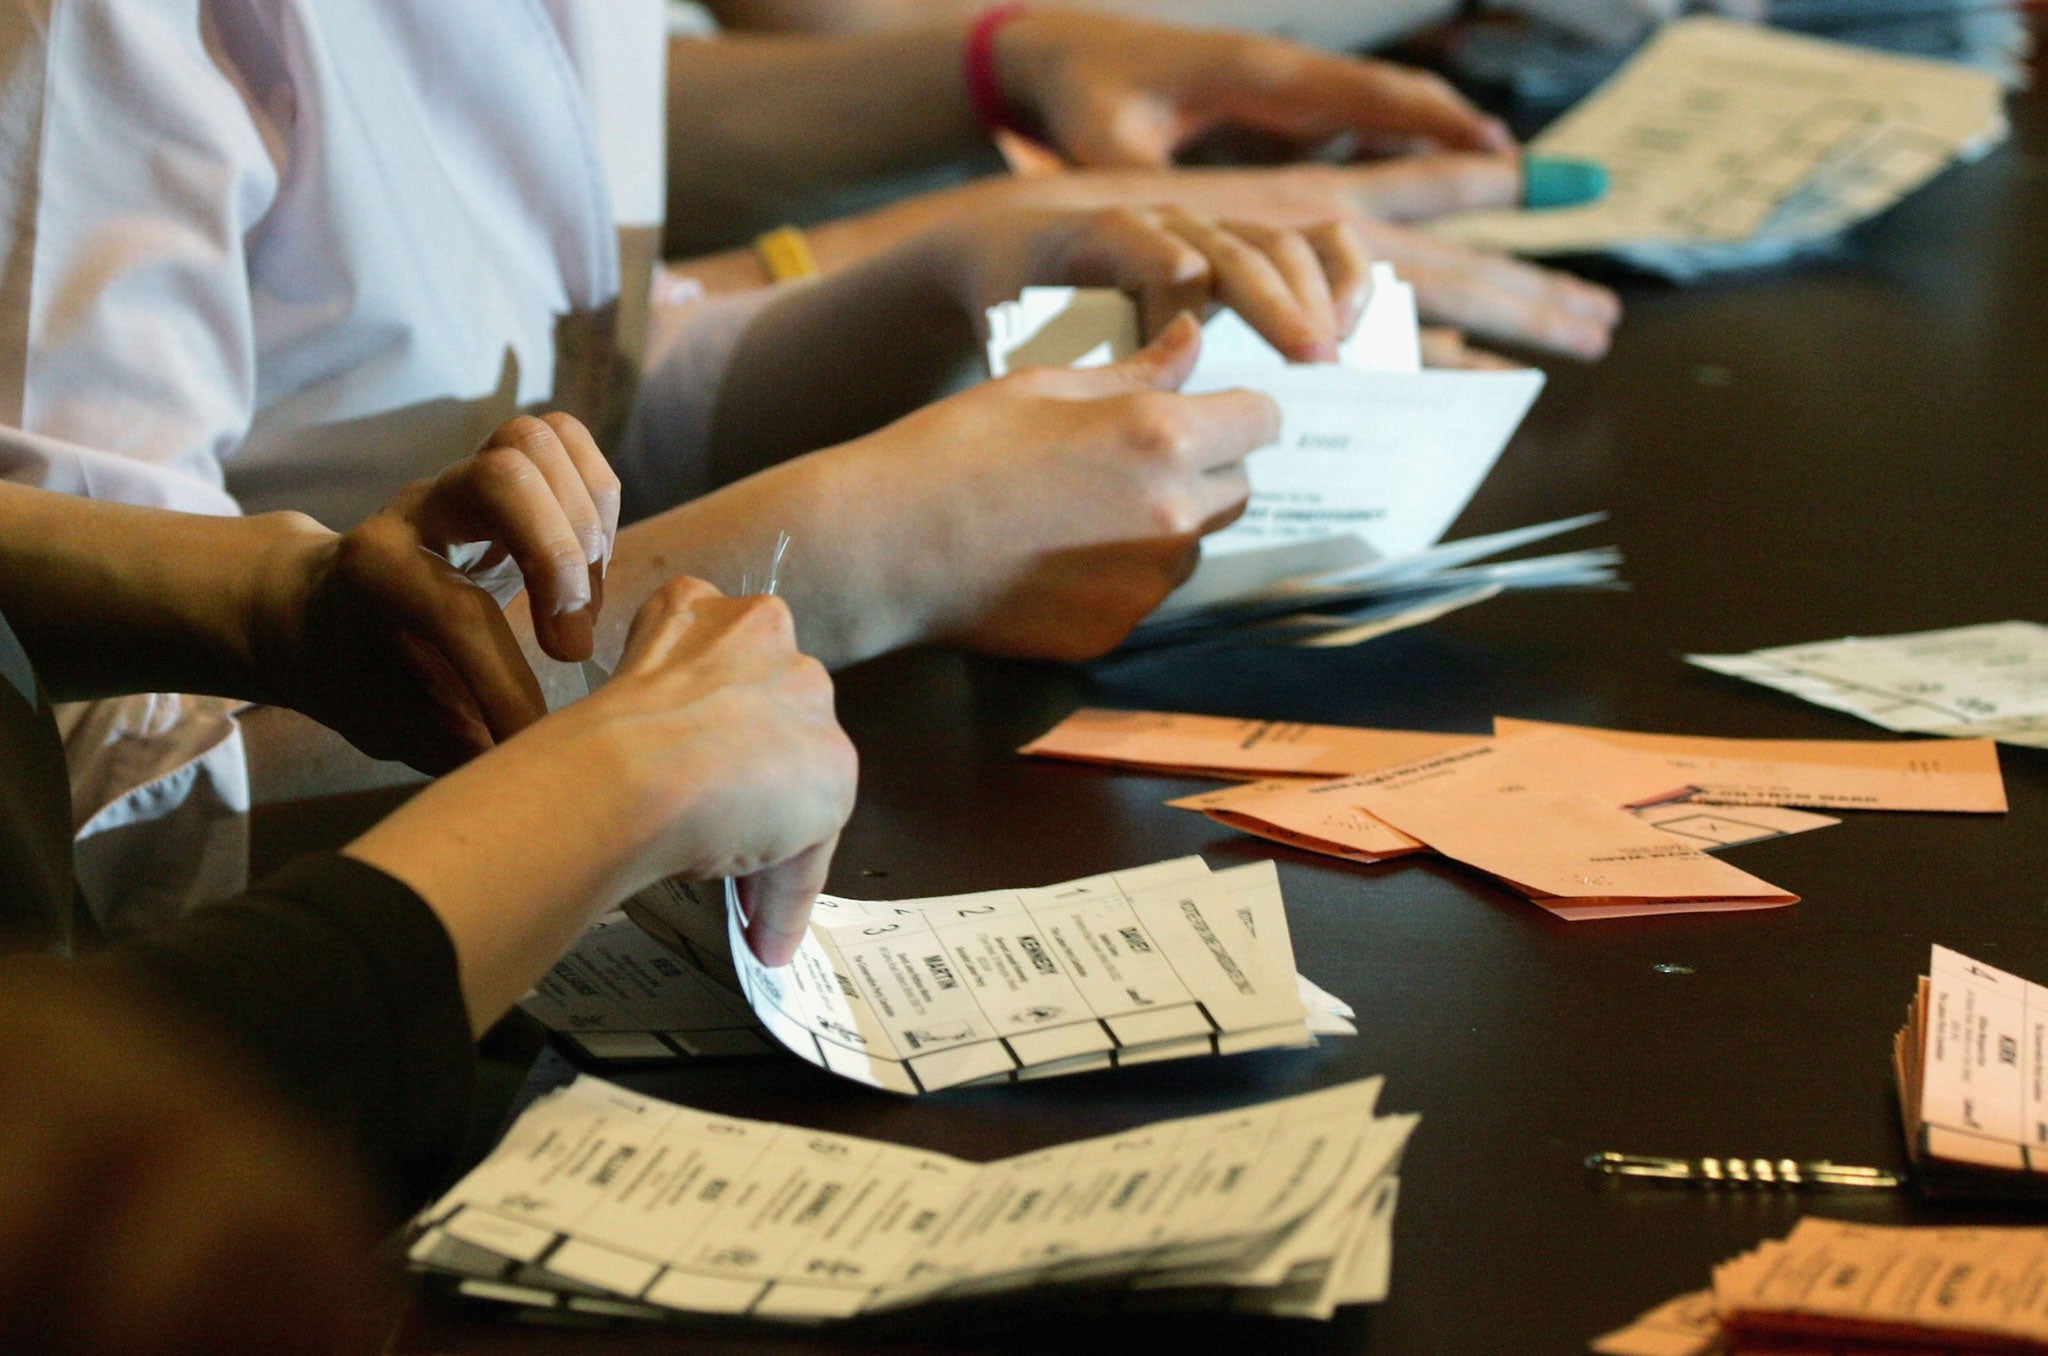 The first ballot papers are sorted during the 2005 Parliamentary Election count for the Bristol West Constituency at Bristol City Council House on May 6, 2005 in Bristol, England.